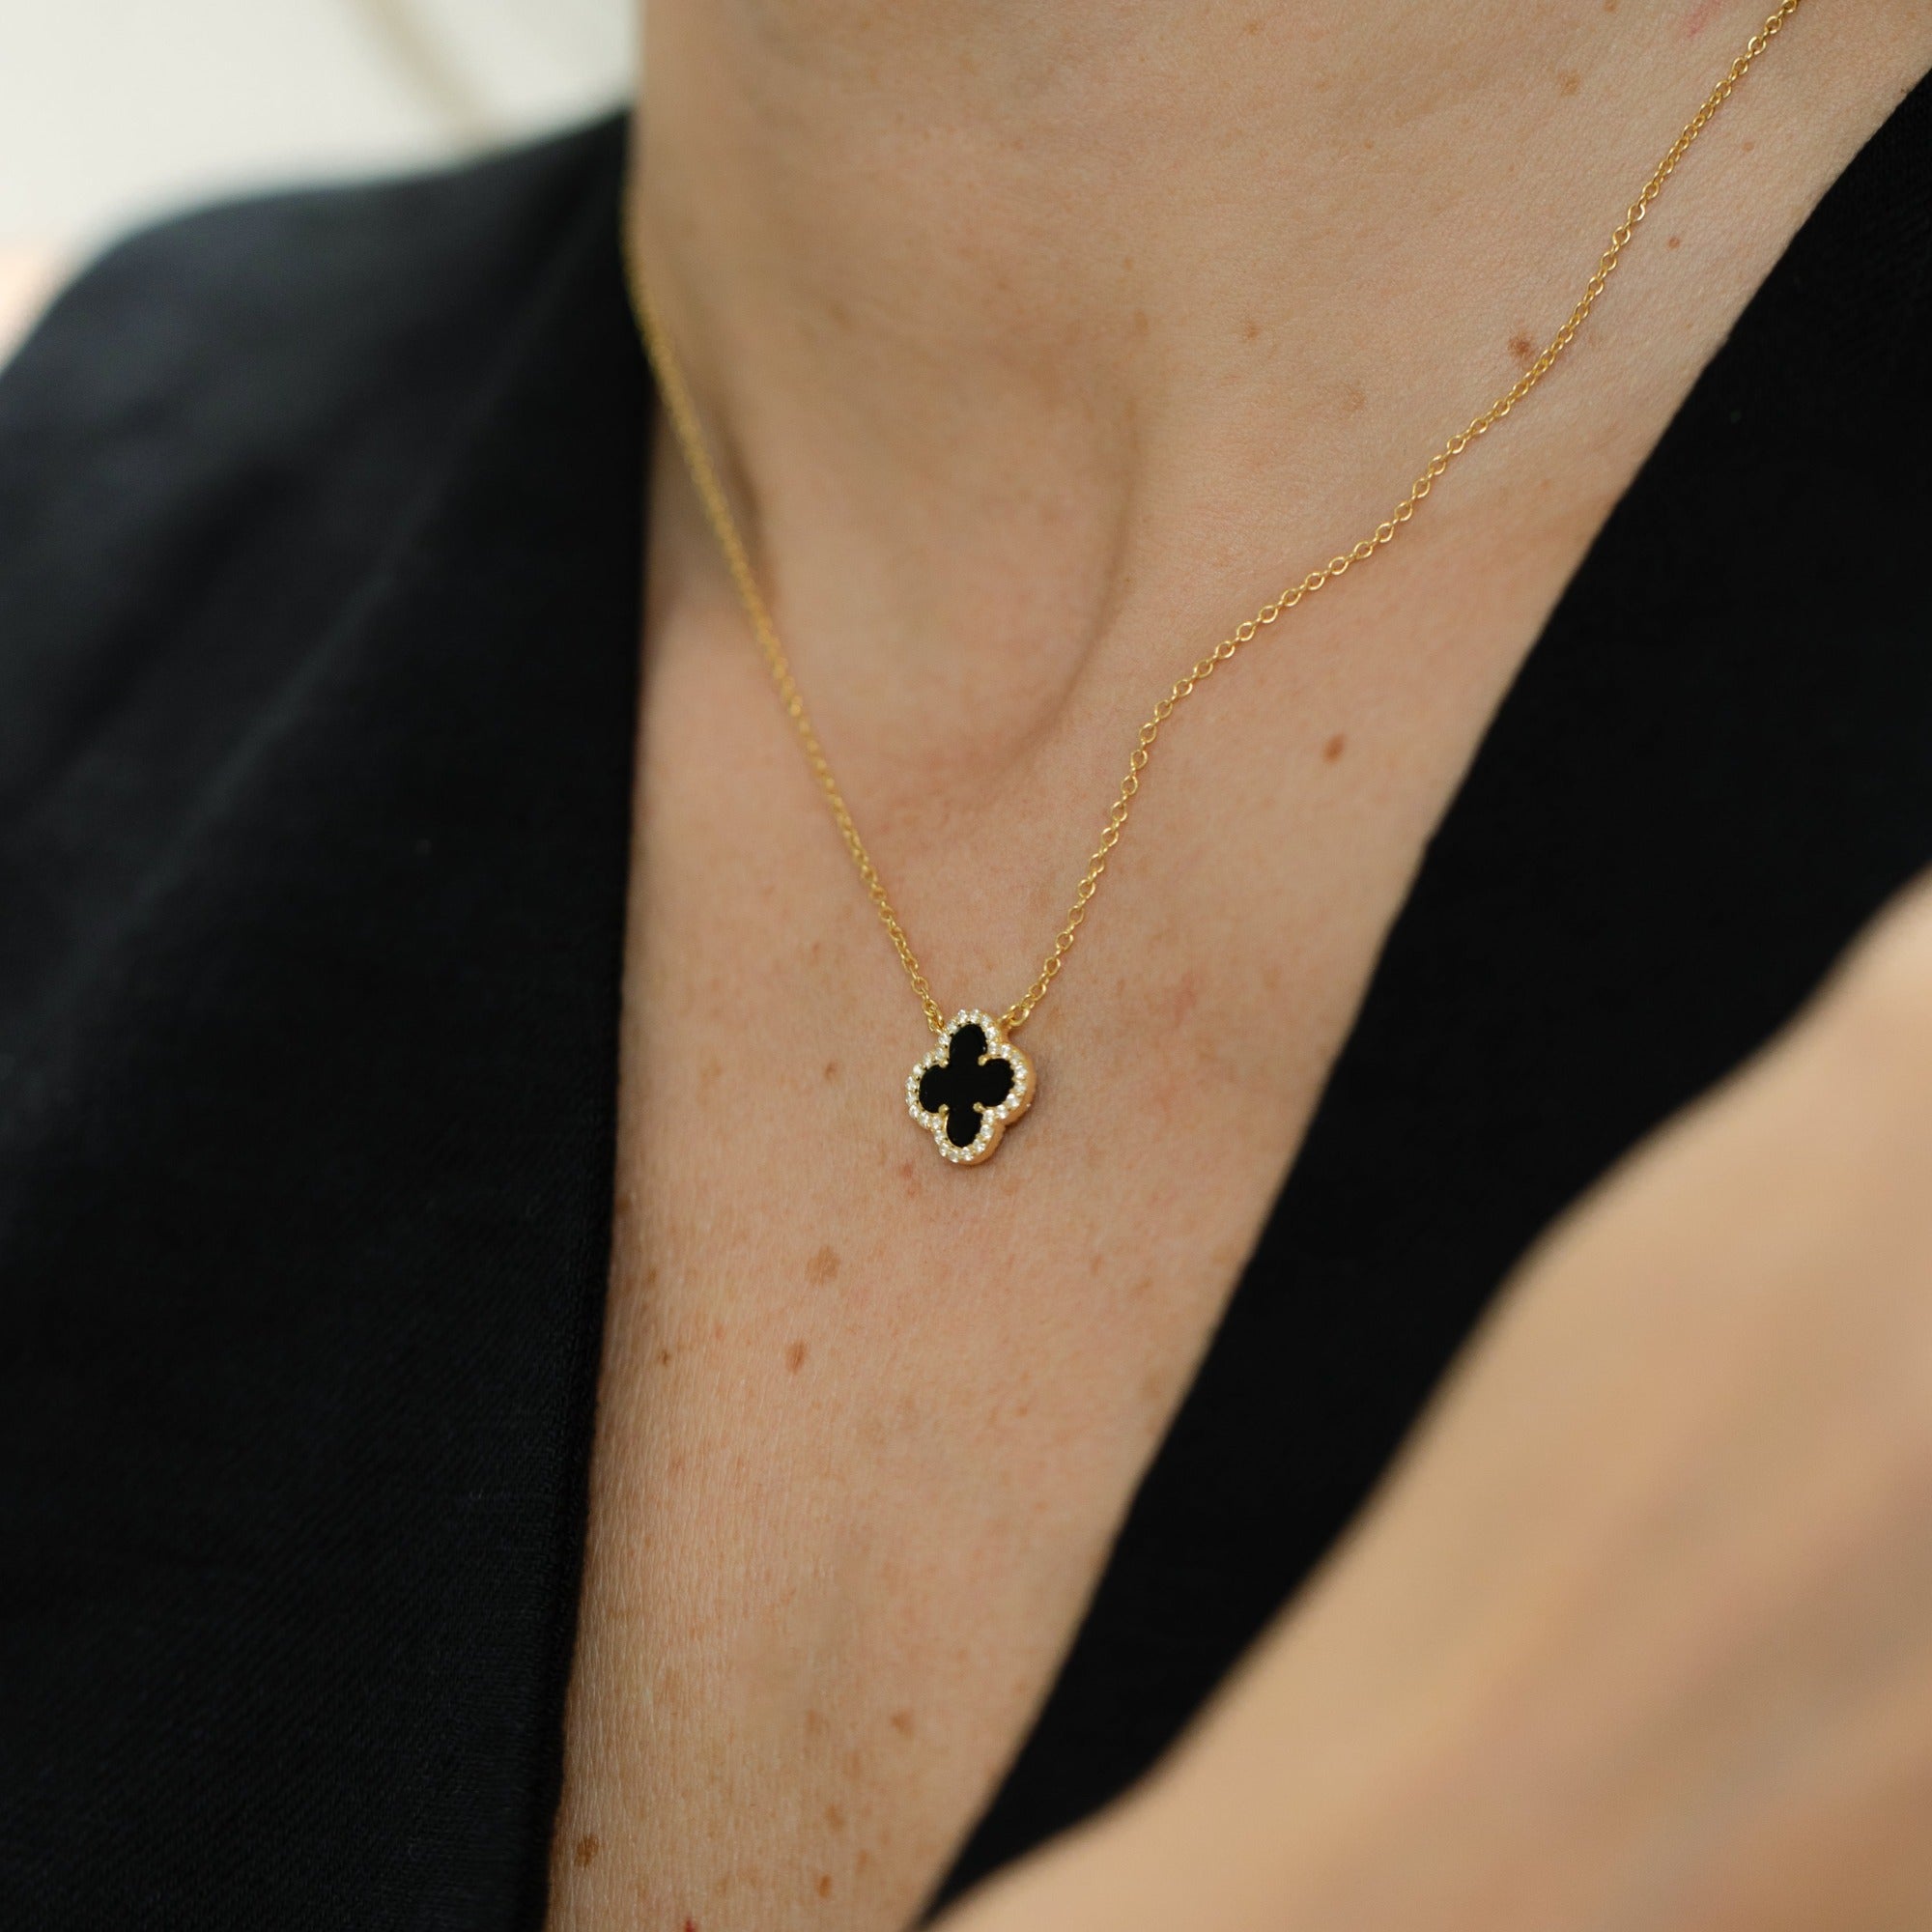 Clover Necklace with Black Onyx and Cubic Zirconia (Gold)